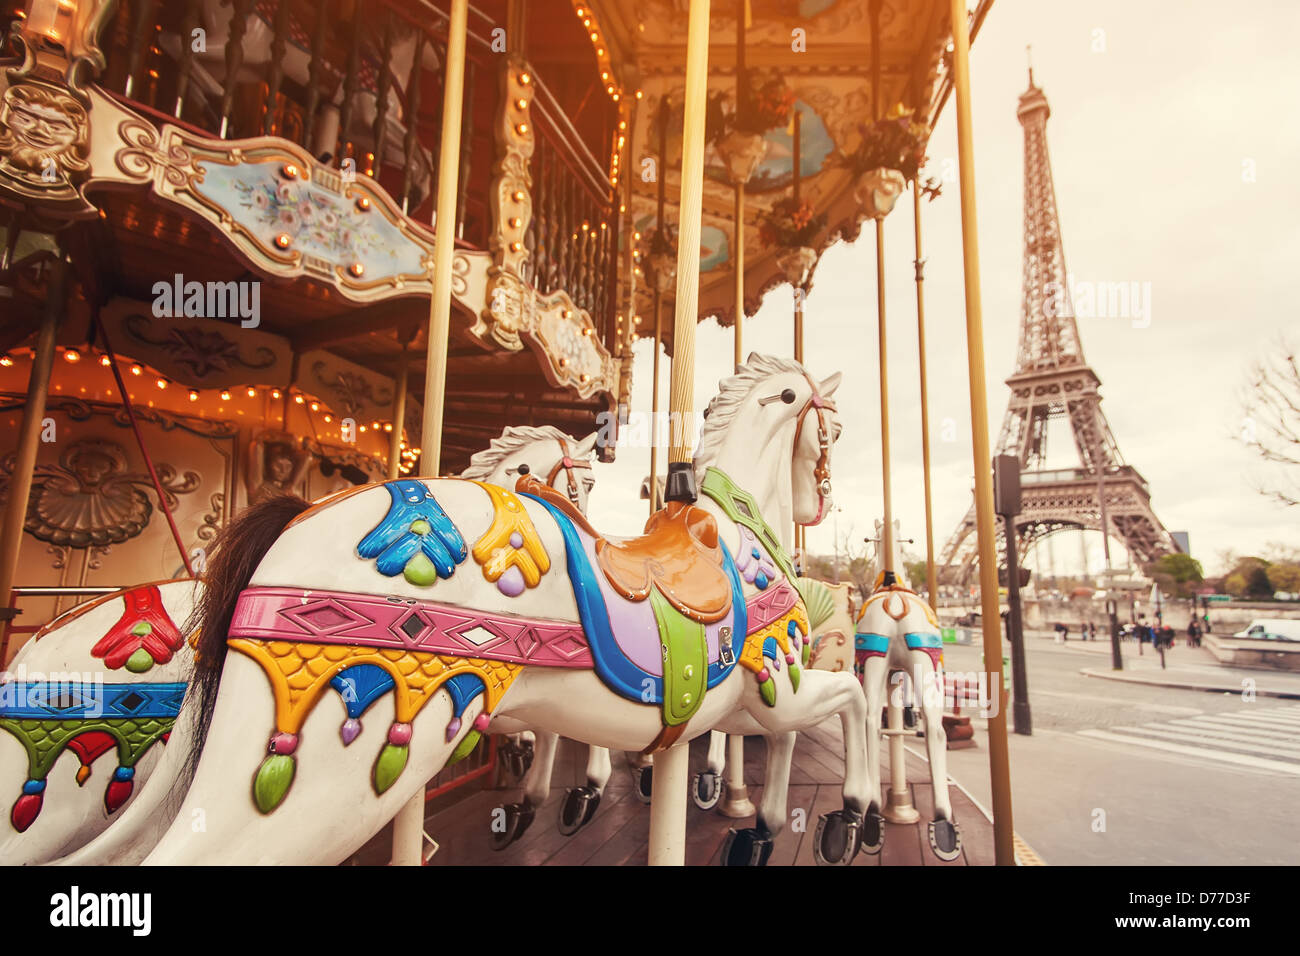 View of the carousel and the Eiffel Tower at sunset Stock Photo